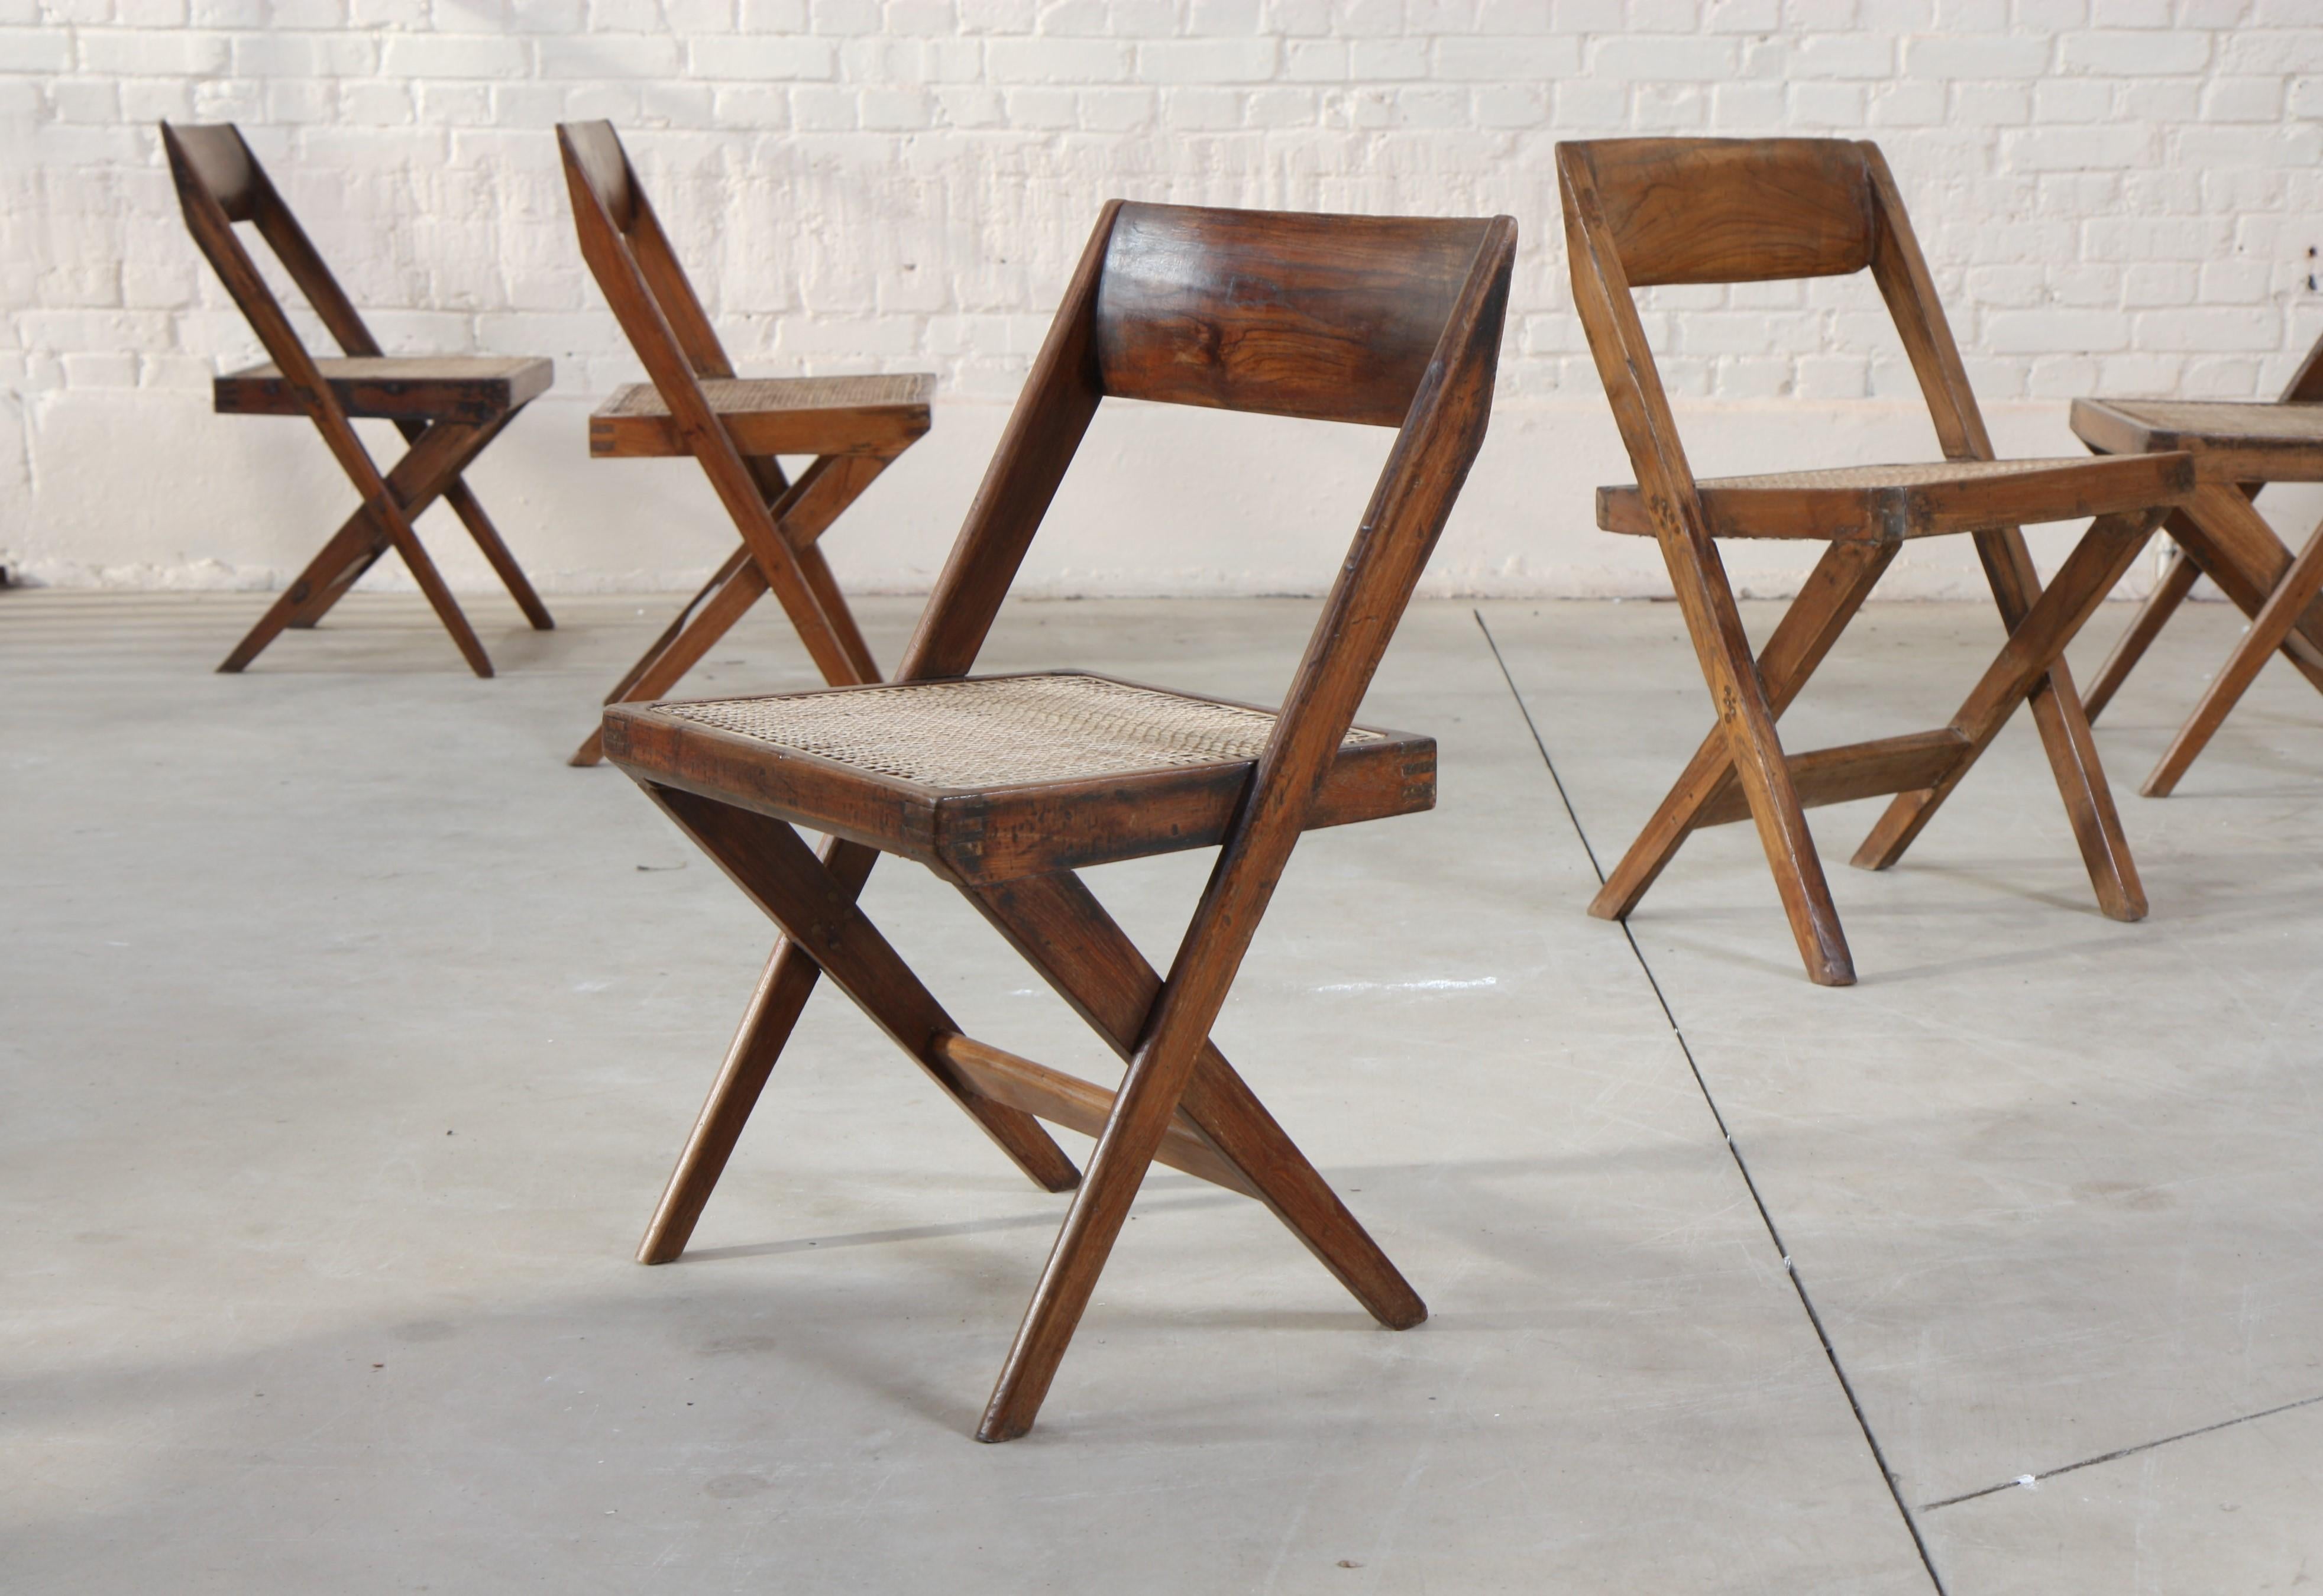 Set of six library chairs with teak headband and caned seat stretched
on a profiled structure forming a double X base joined by a spacer at the rear.
Restoration of use and maintenance.
Provenance: Bookstore of the University of Chandigarh, India.